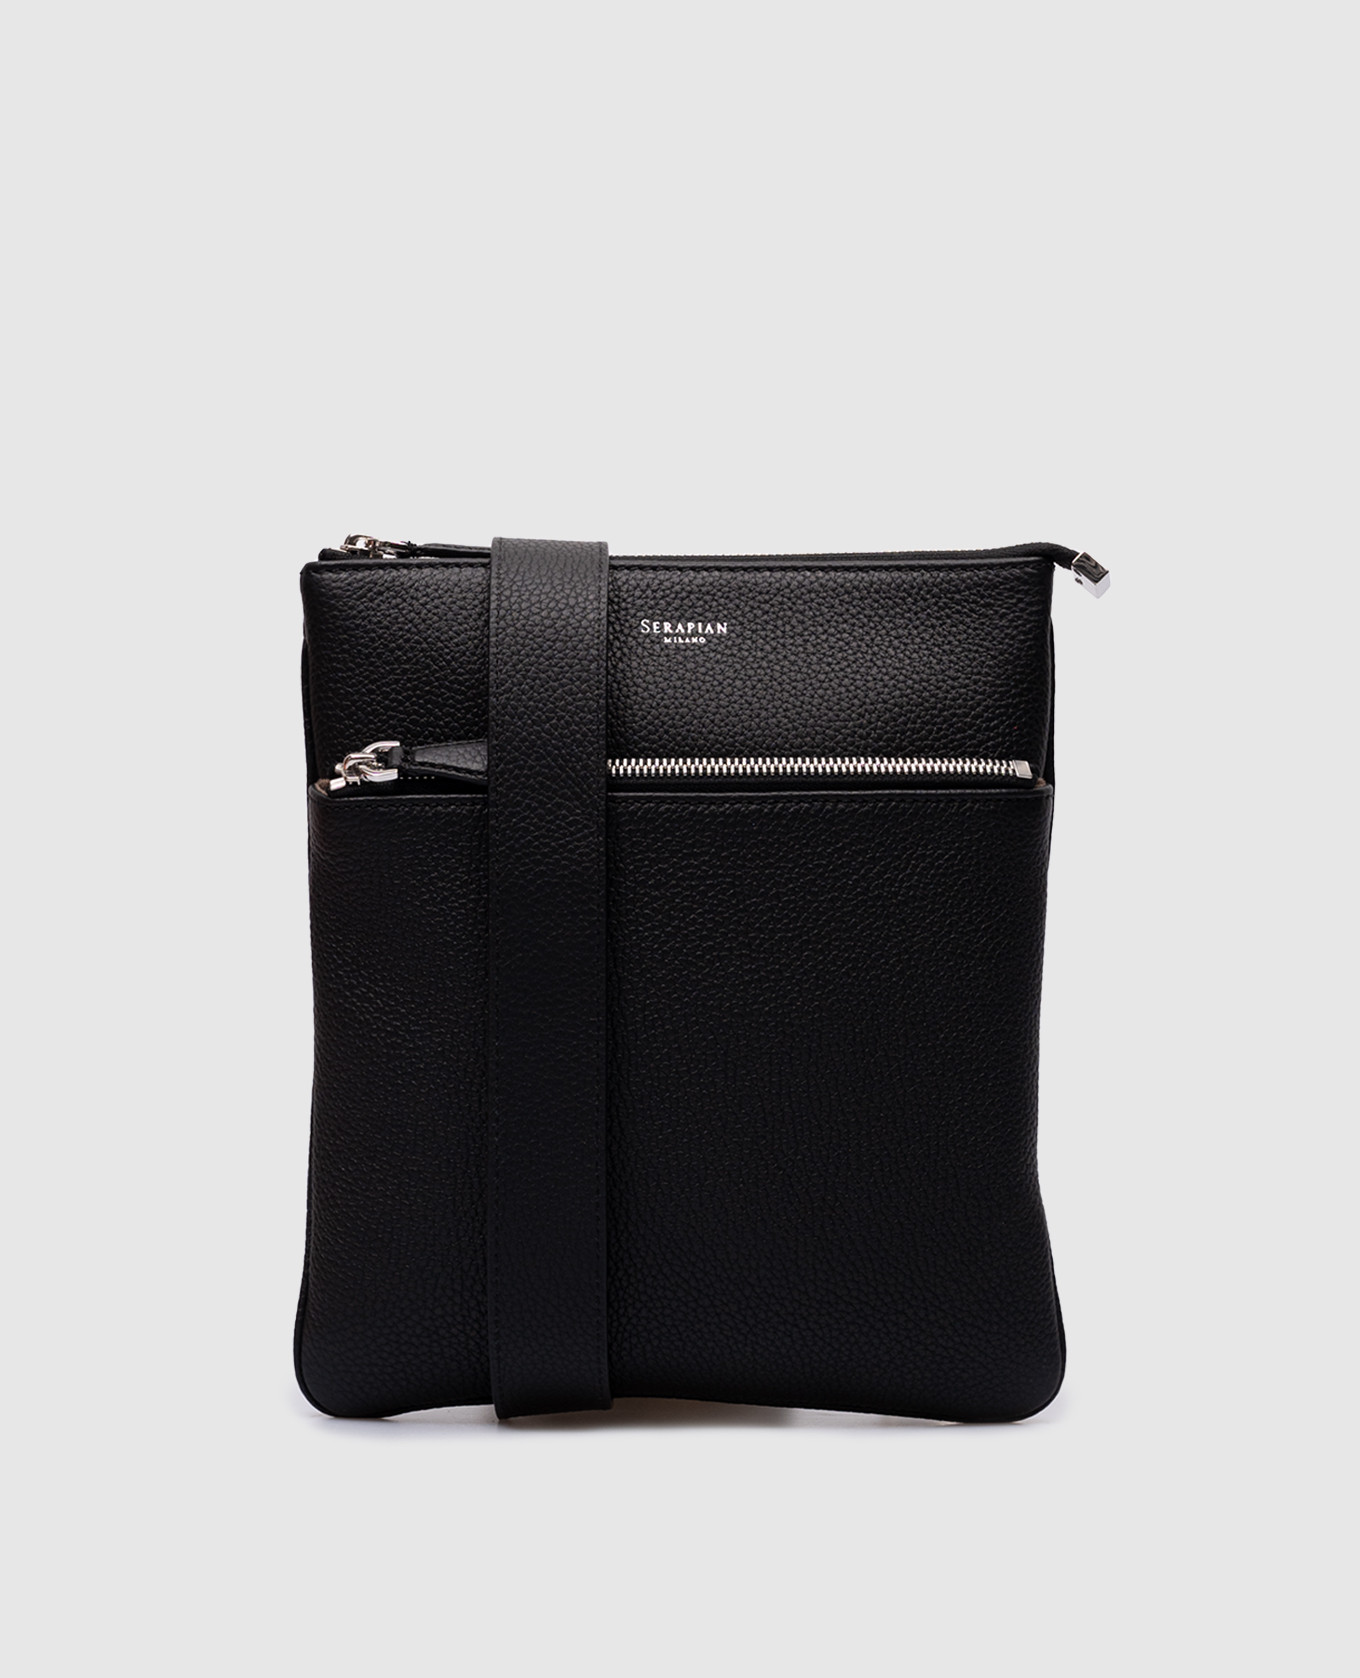 Black leather bag with logo